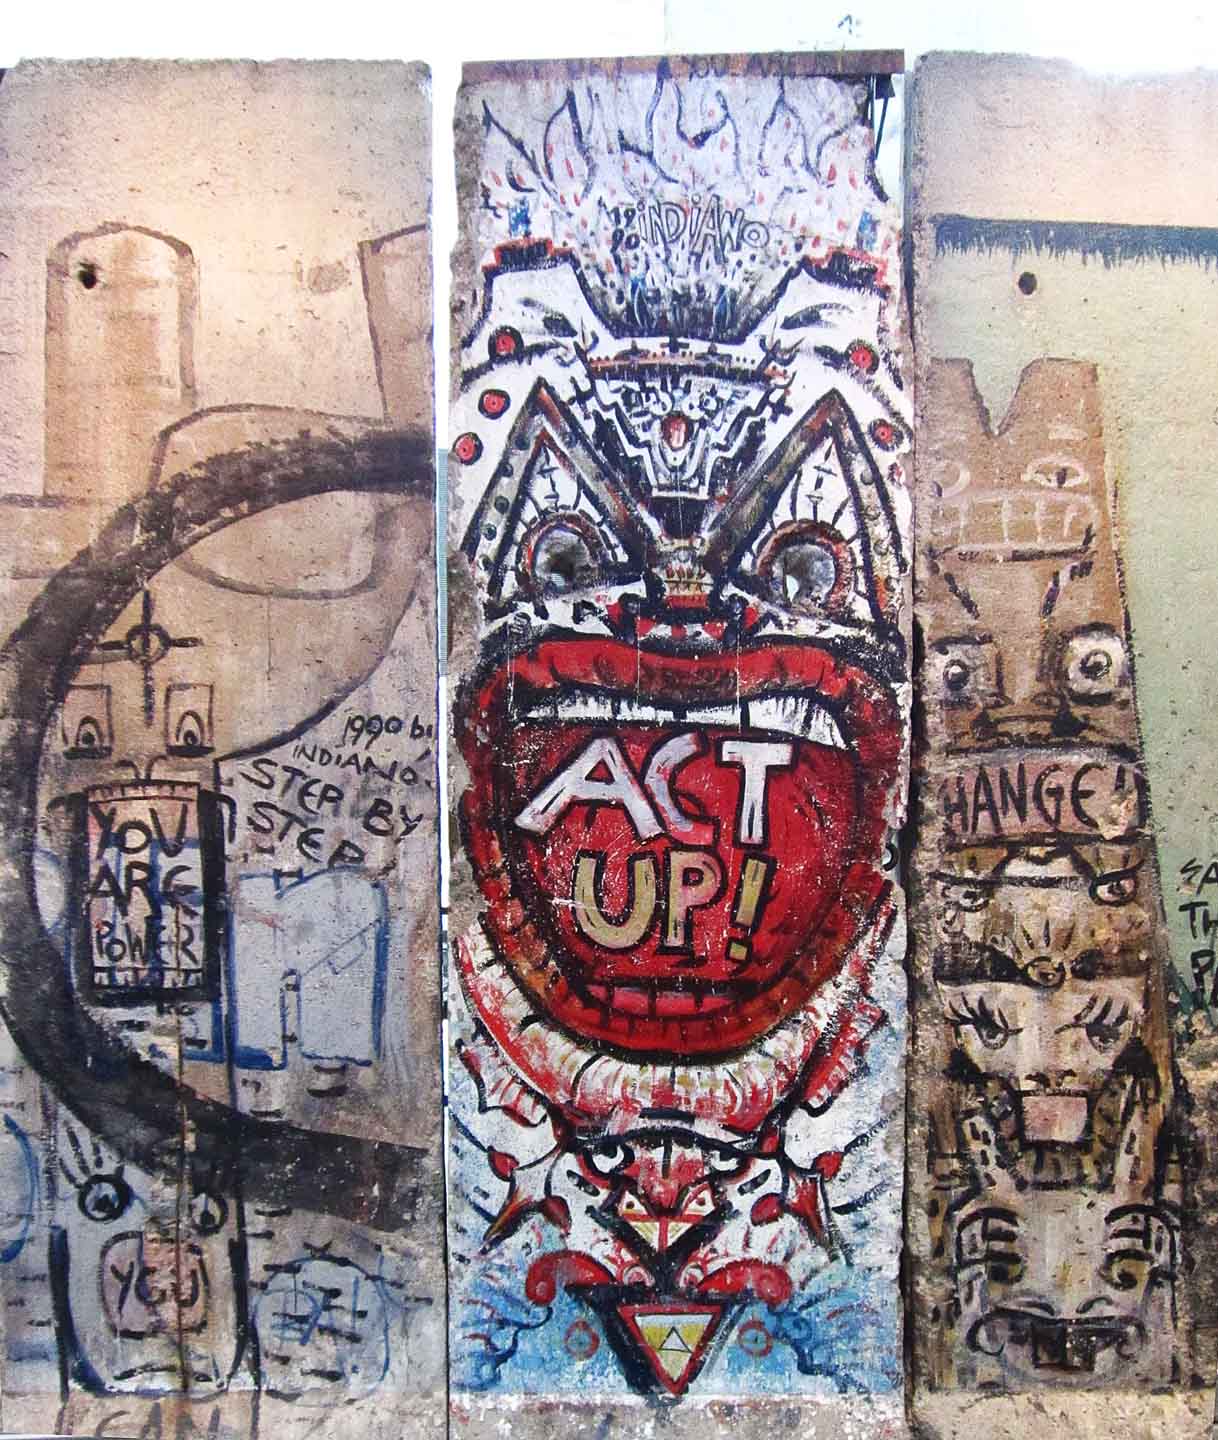 Section of Berlin Wall on display at Newseum, Washington DC. Photo: Tony Carnes/A Journey through NYC religions